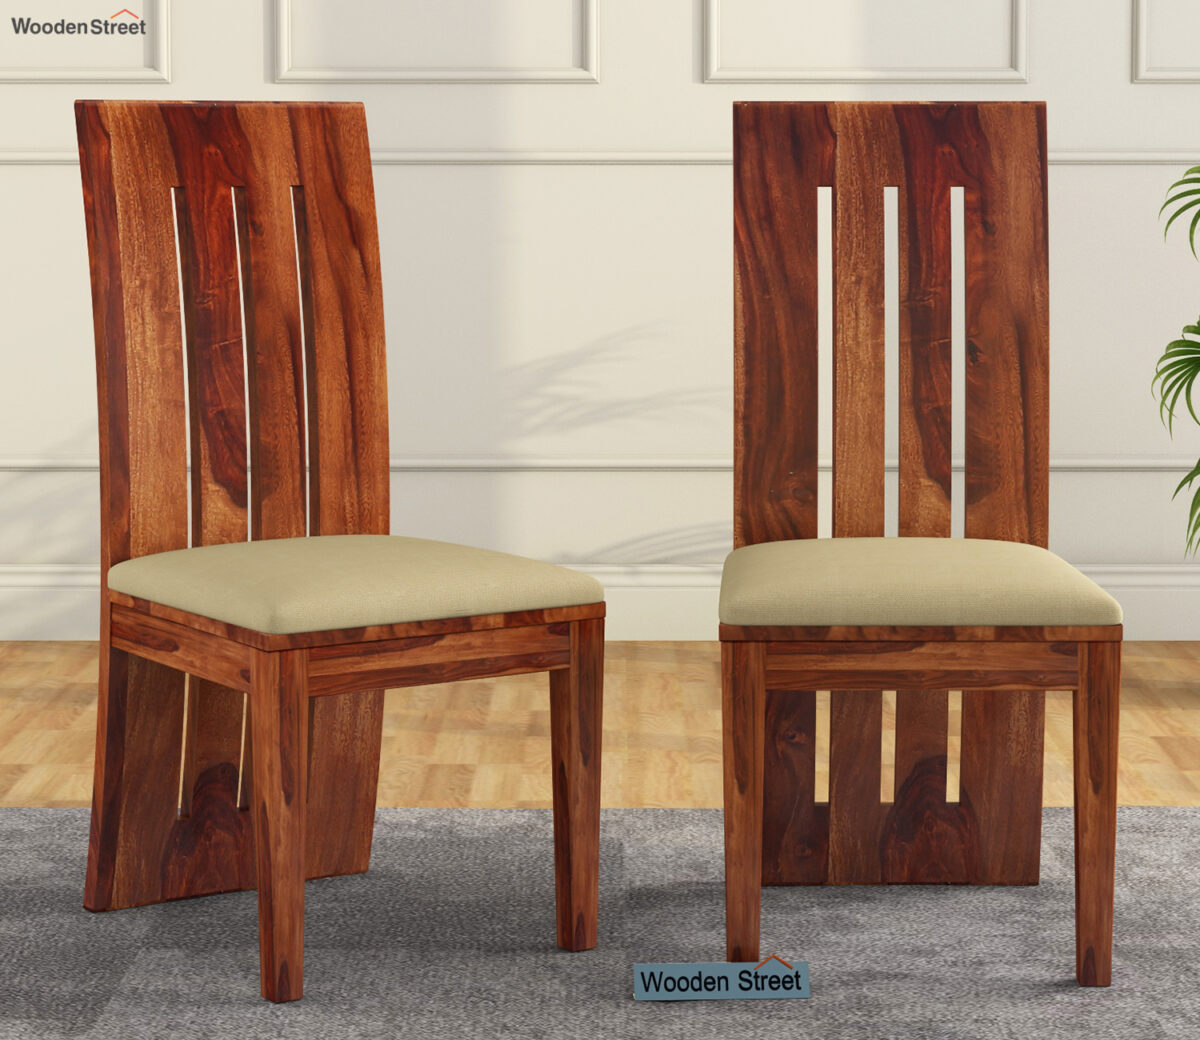 Purchase the Comfortable Dining Chairs